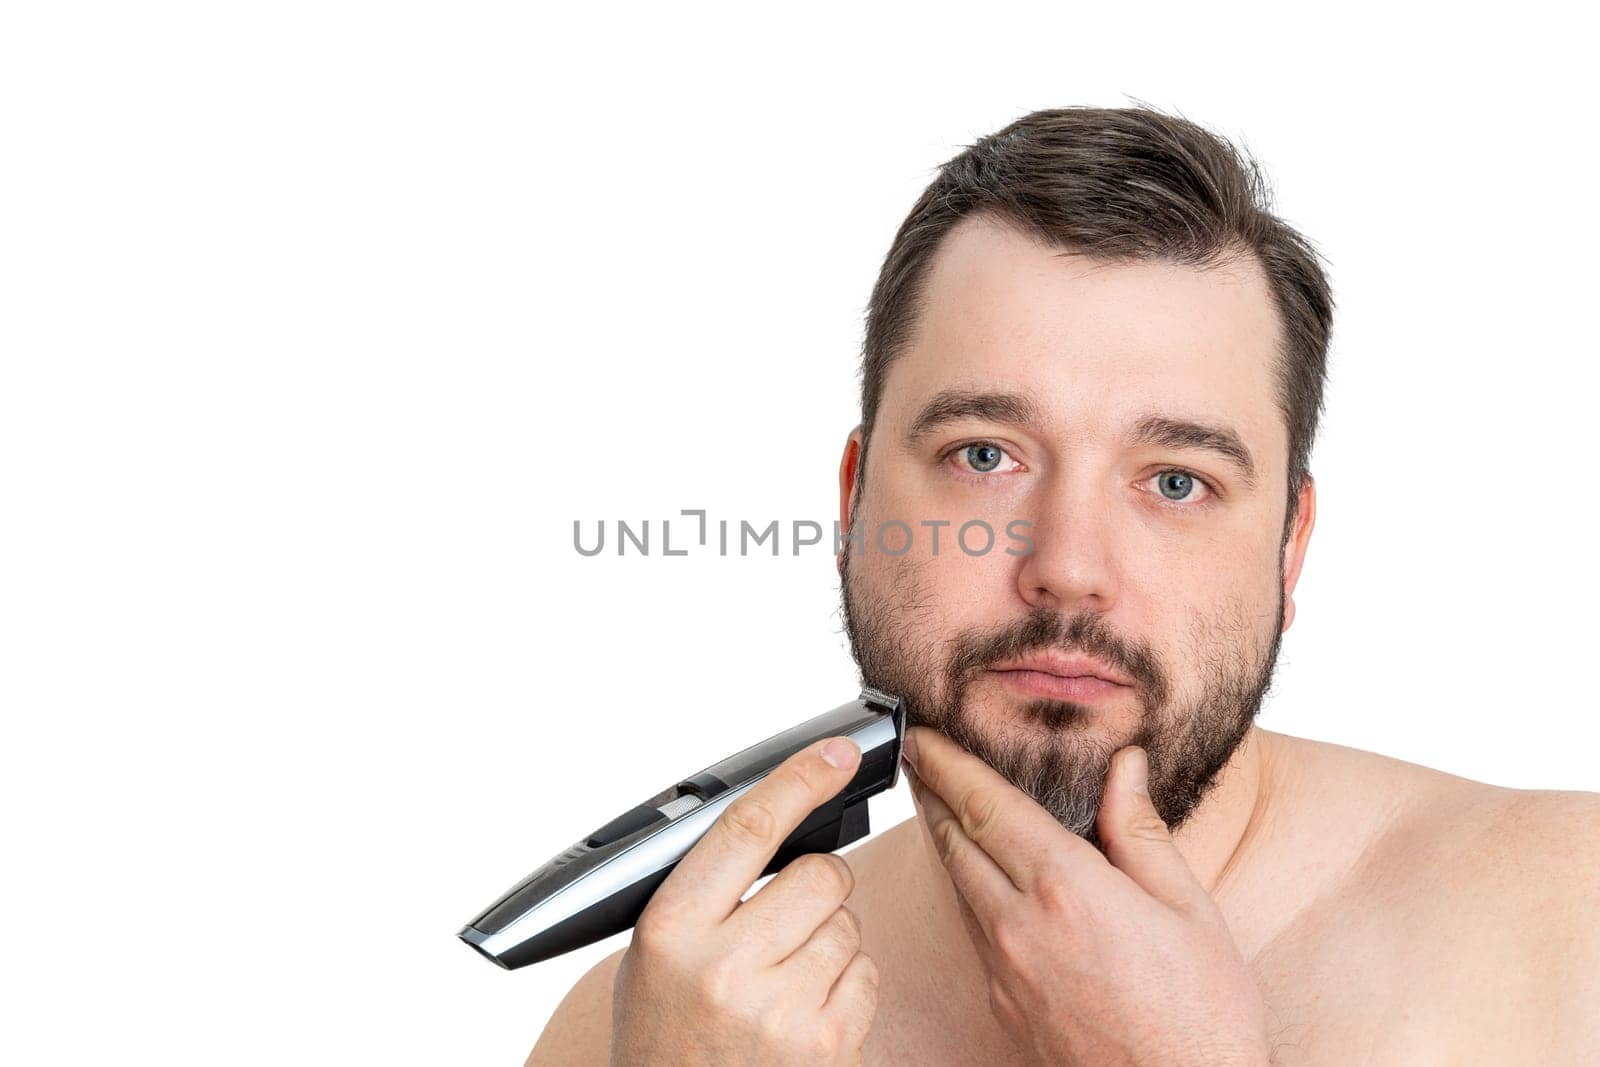 A young man with casual clothing is using an electric shaver to groom and shave his well-maintained beard. The image showcases personal grooming and hygiene against a clean white background.